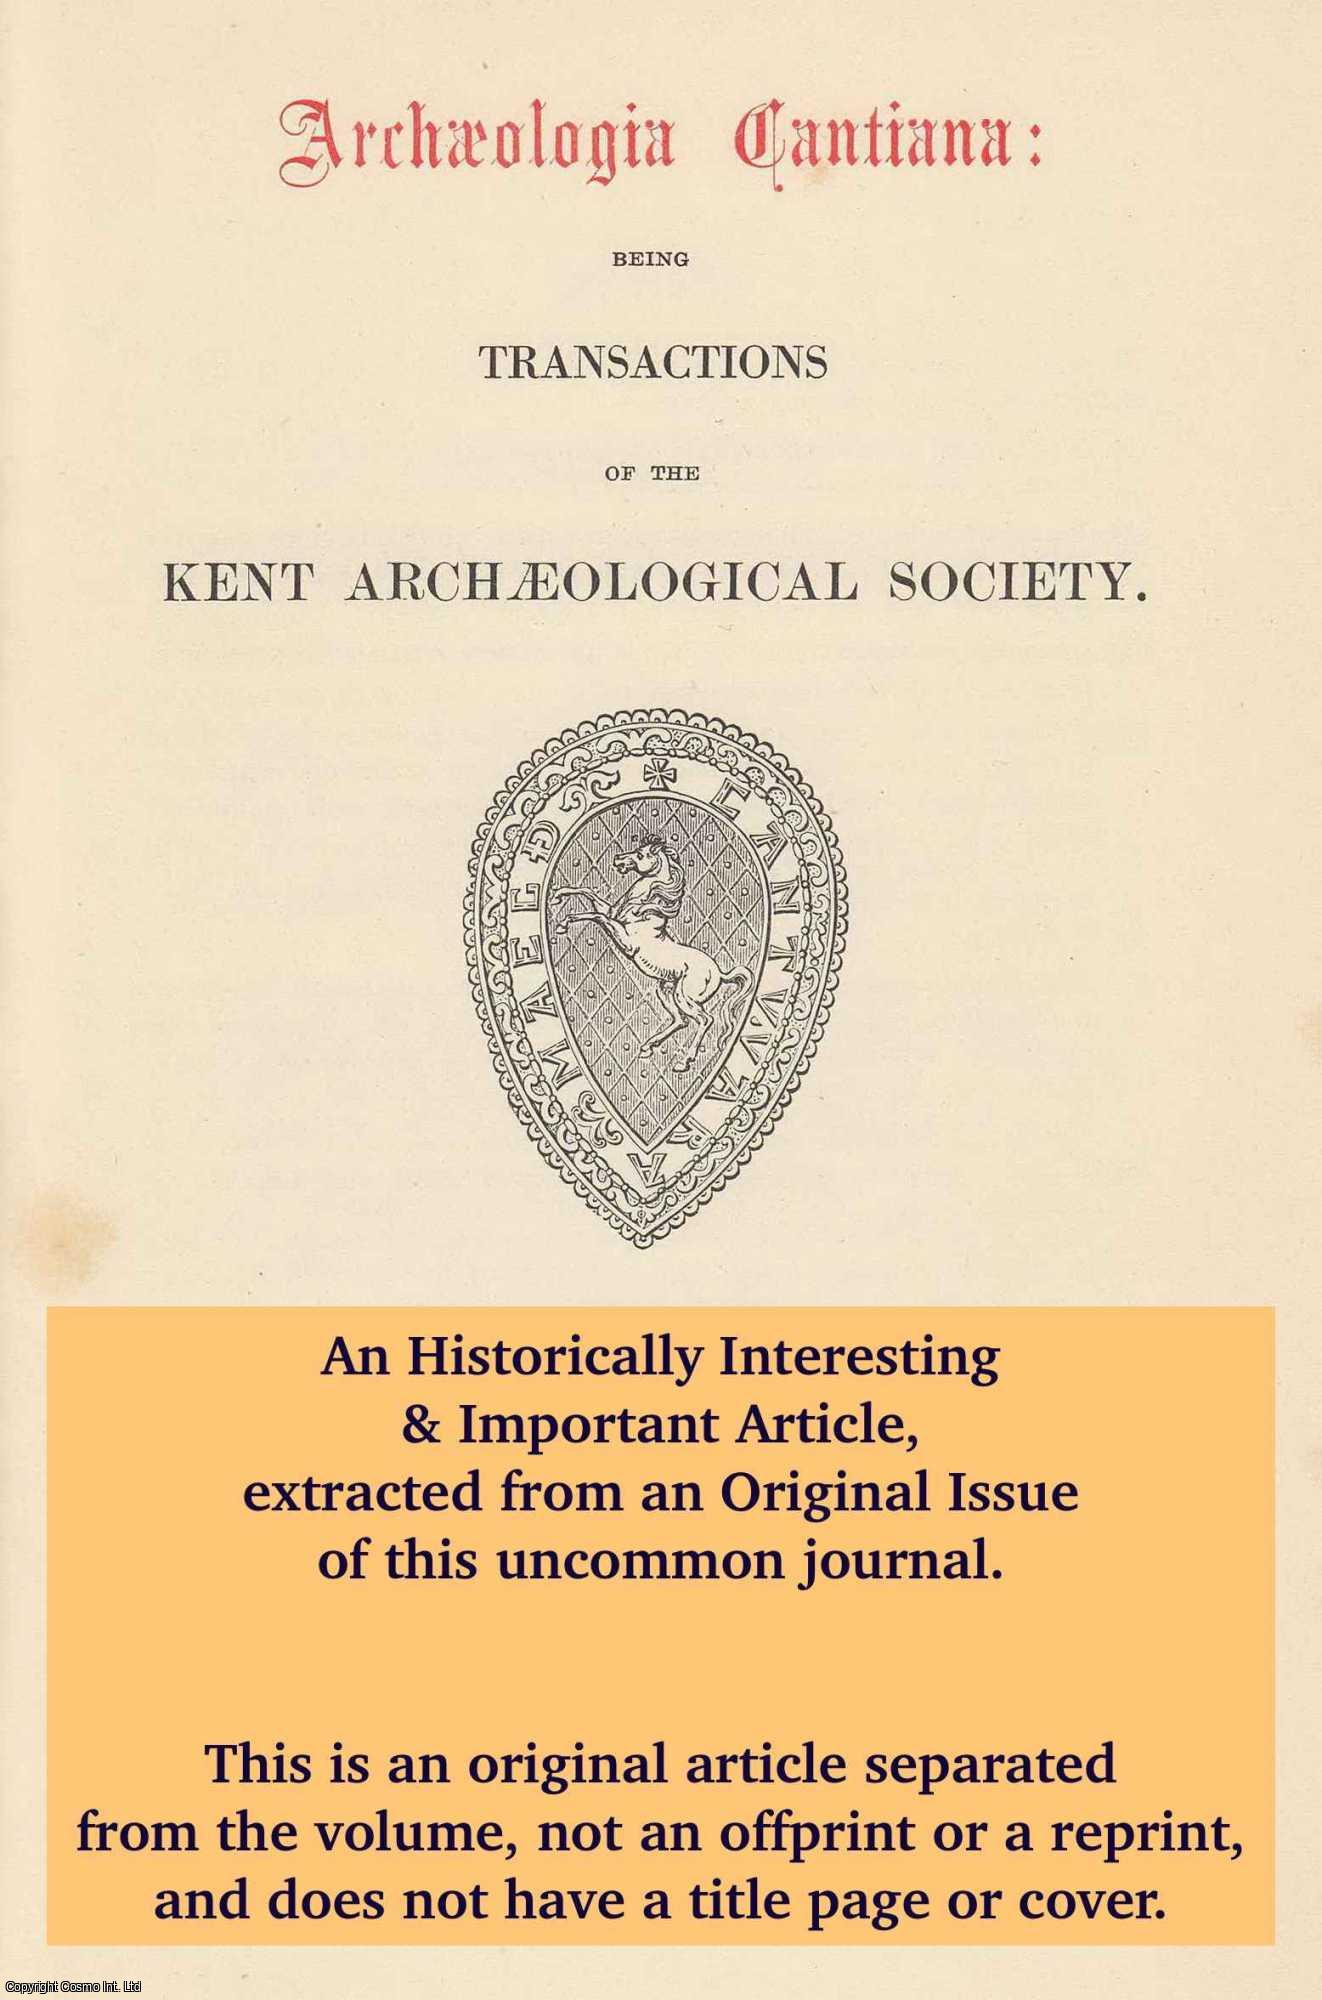 M.M. O'Grady - Hedgerows and Tracks. An original article from The Archaeologia Cantiana: Transactions of The Kent Archaeological Society, 1979.